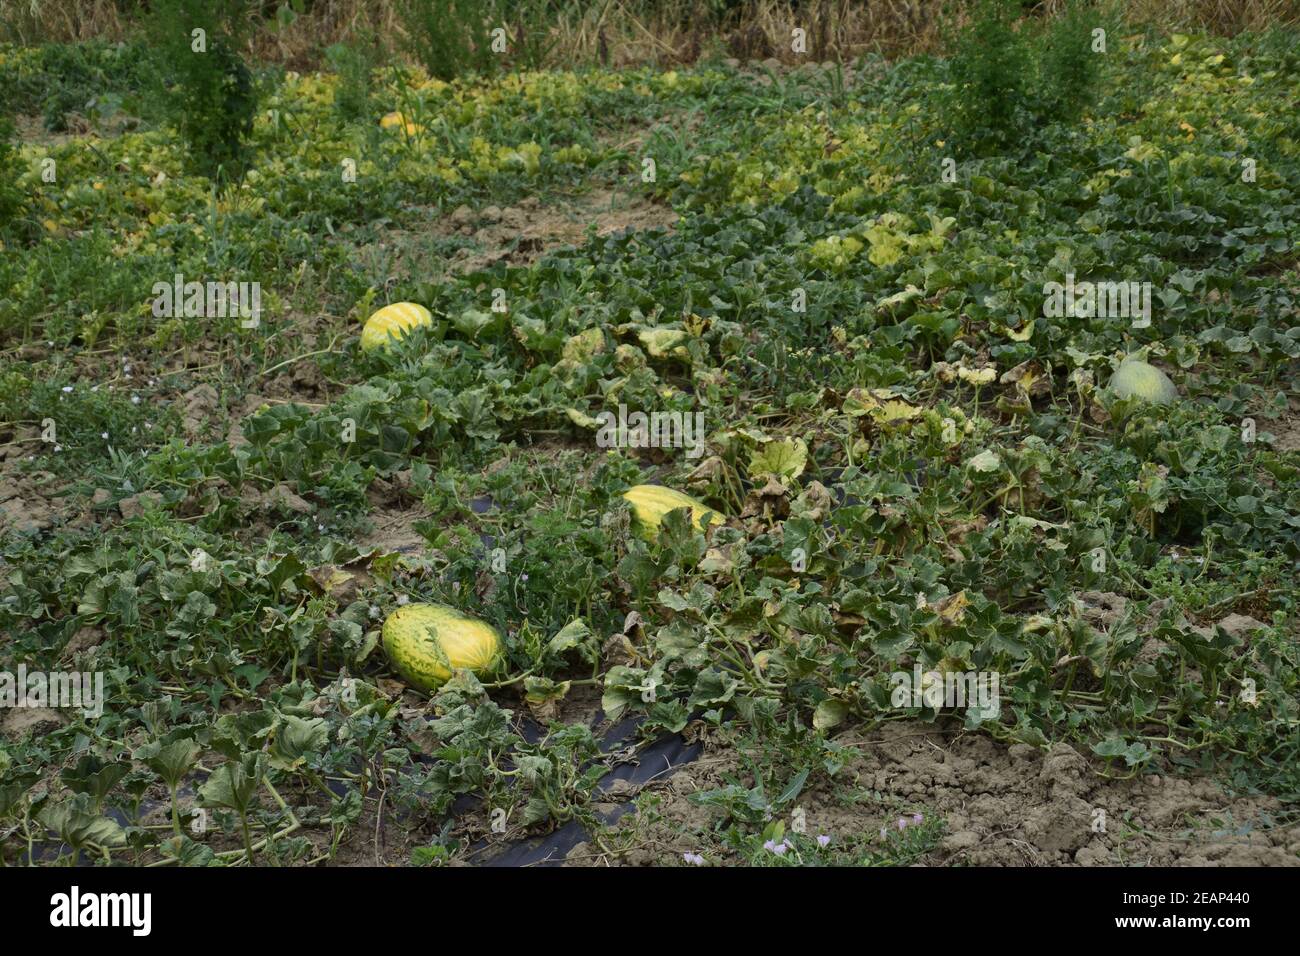 The bed of melons and watermelons in the garden Stock Photo